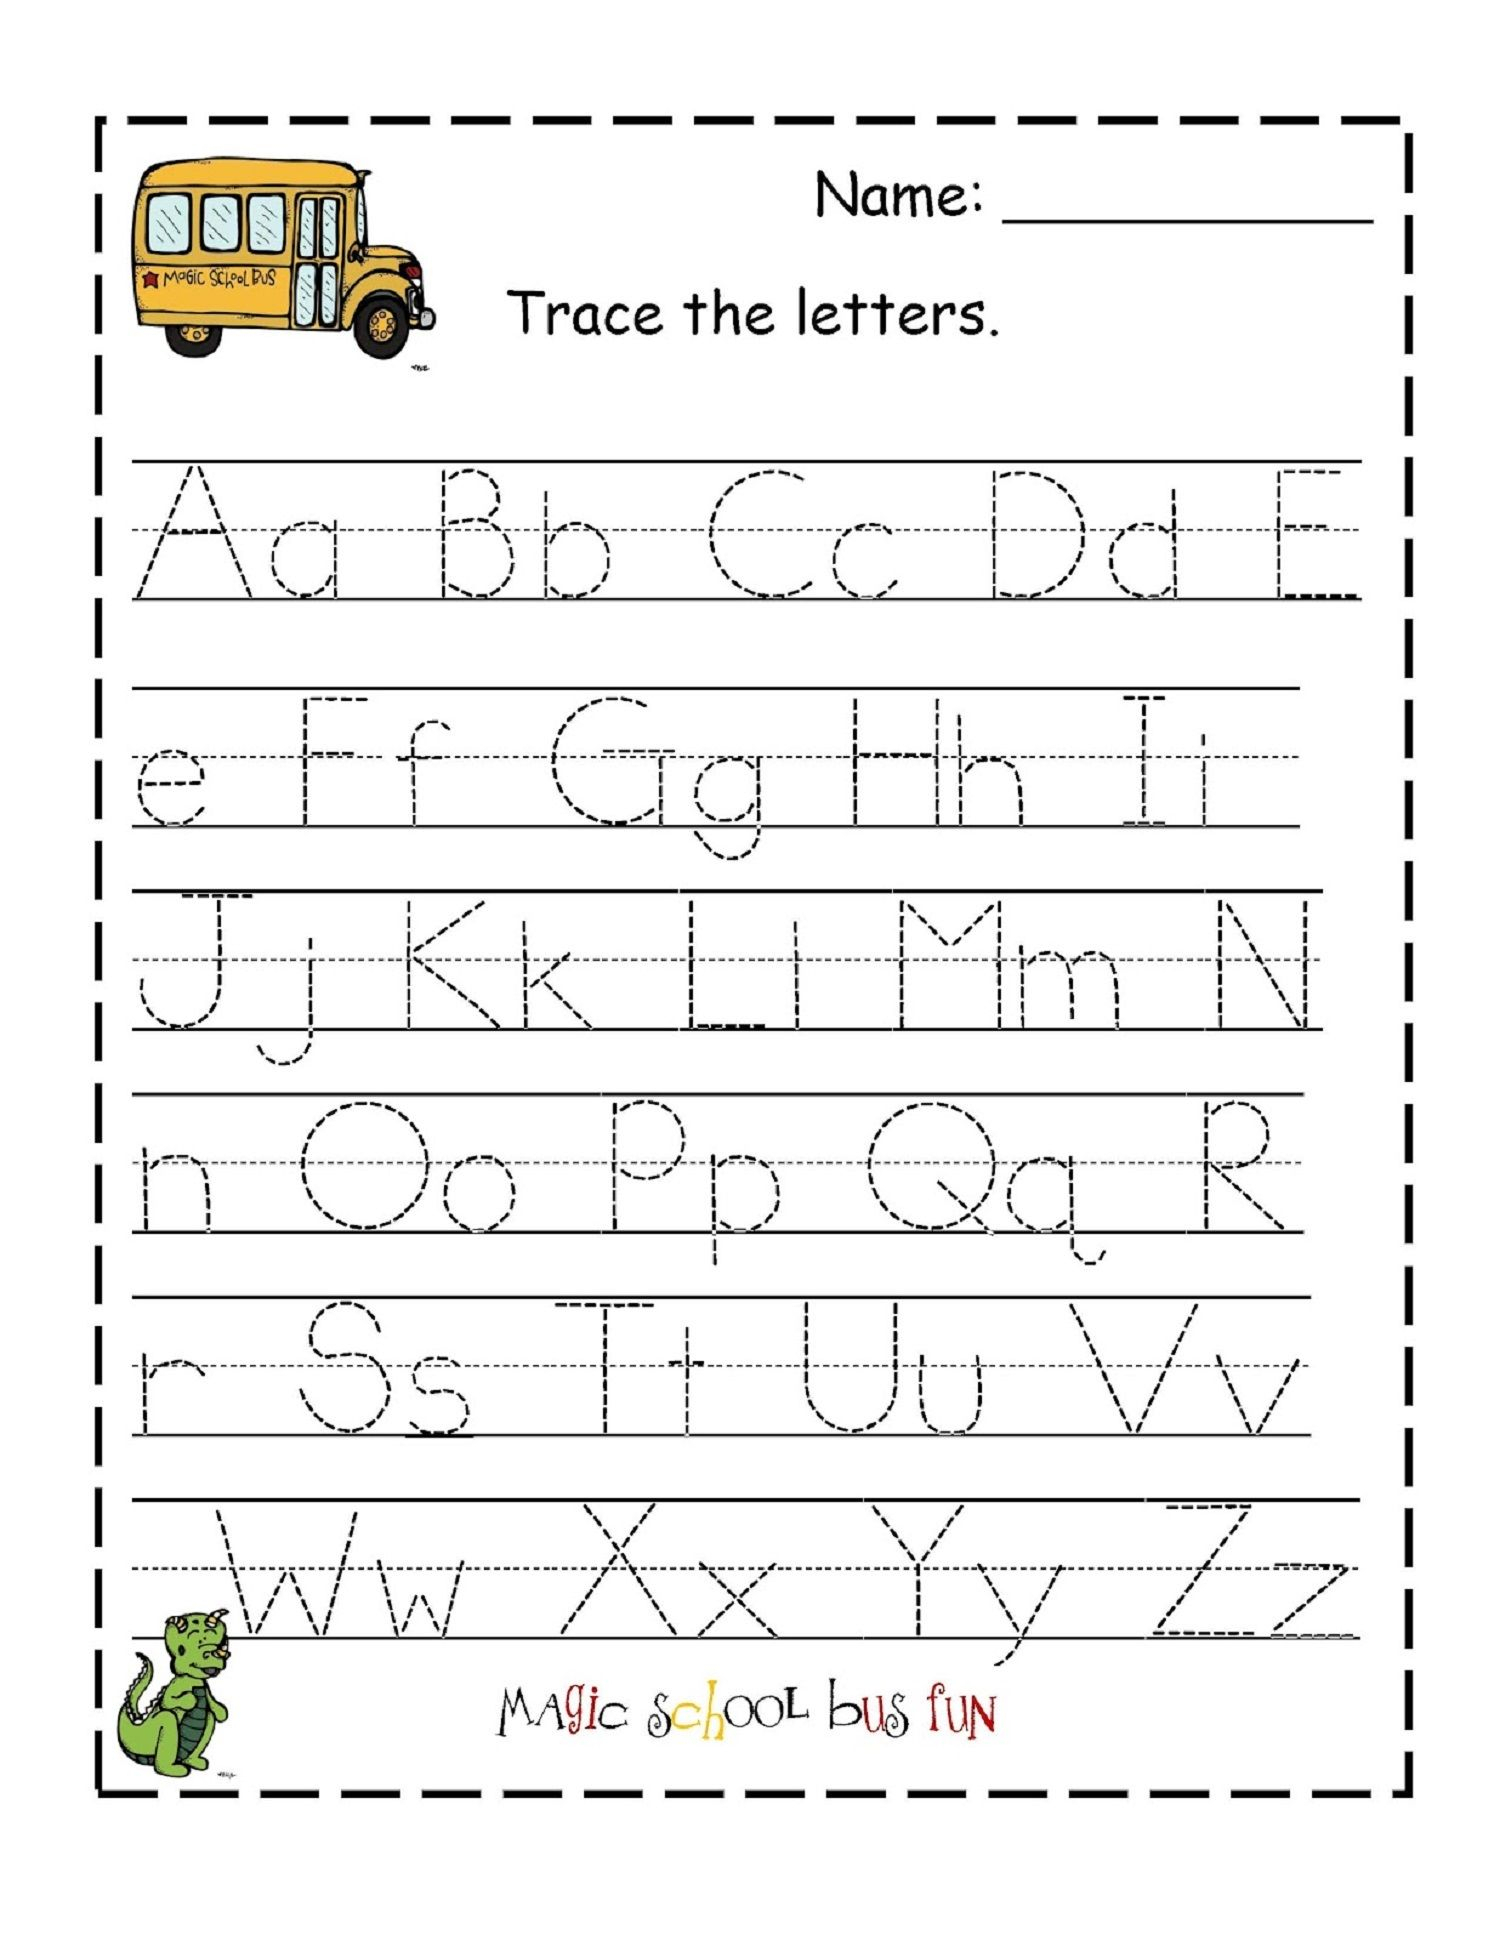 Traceable Alphabet For Learning Exercise | Alphabet Tracing pertaining to Alphabet Tracing Exercises